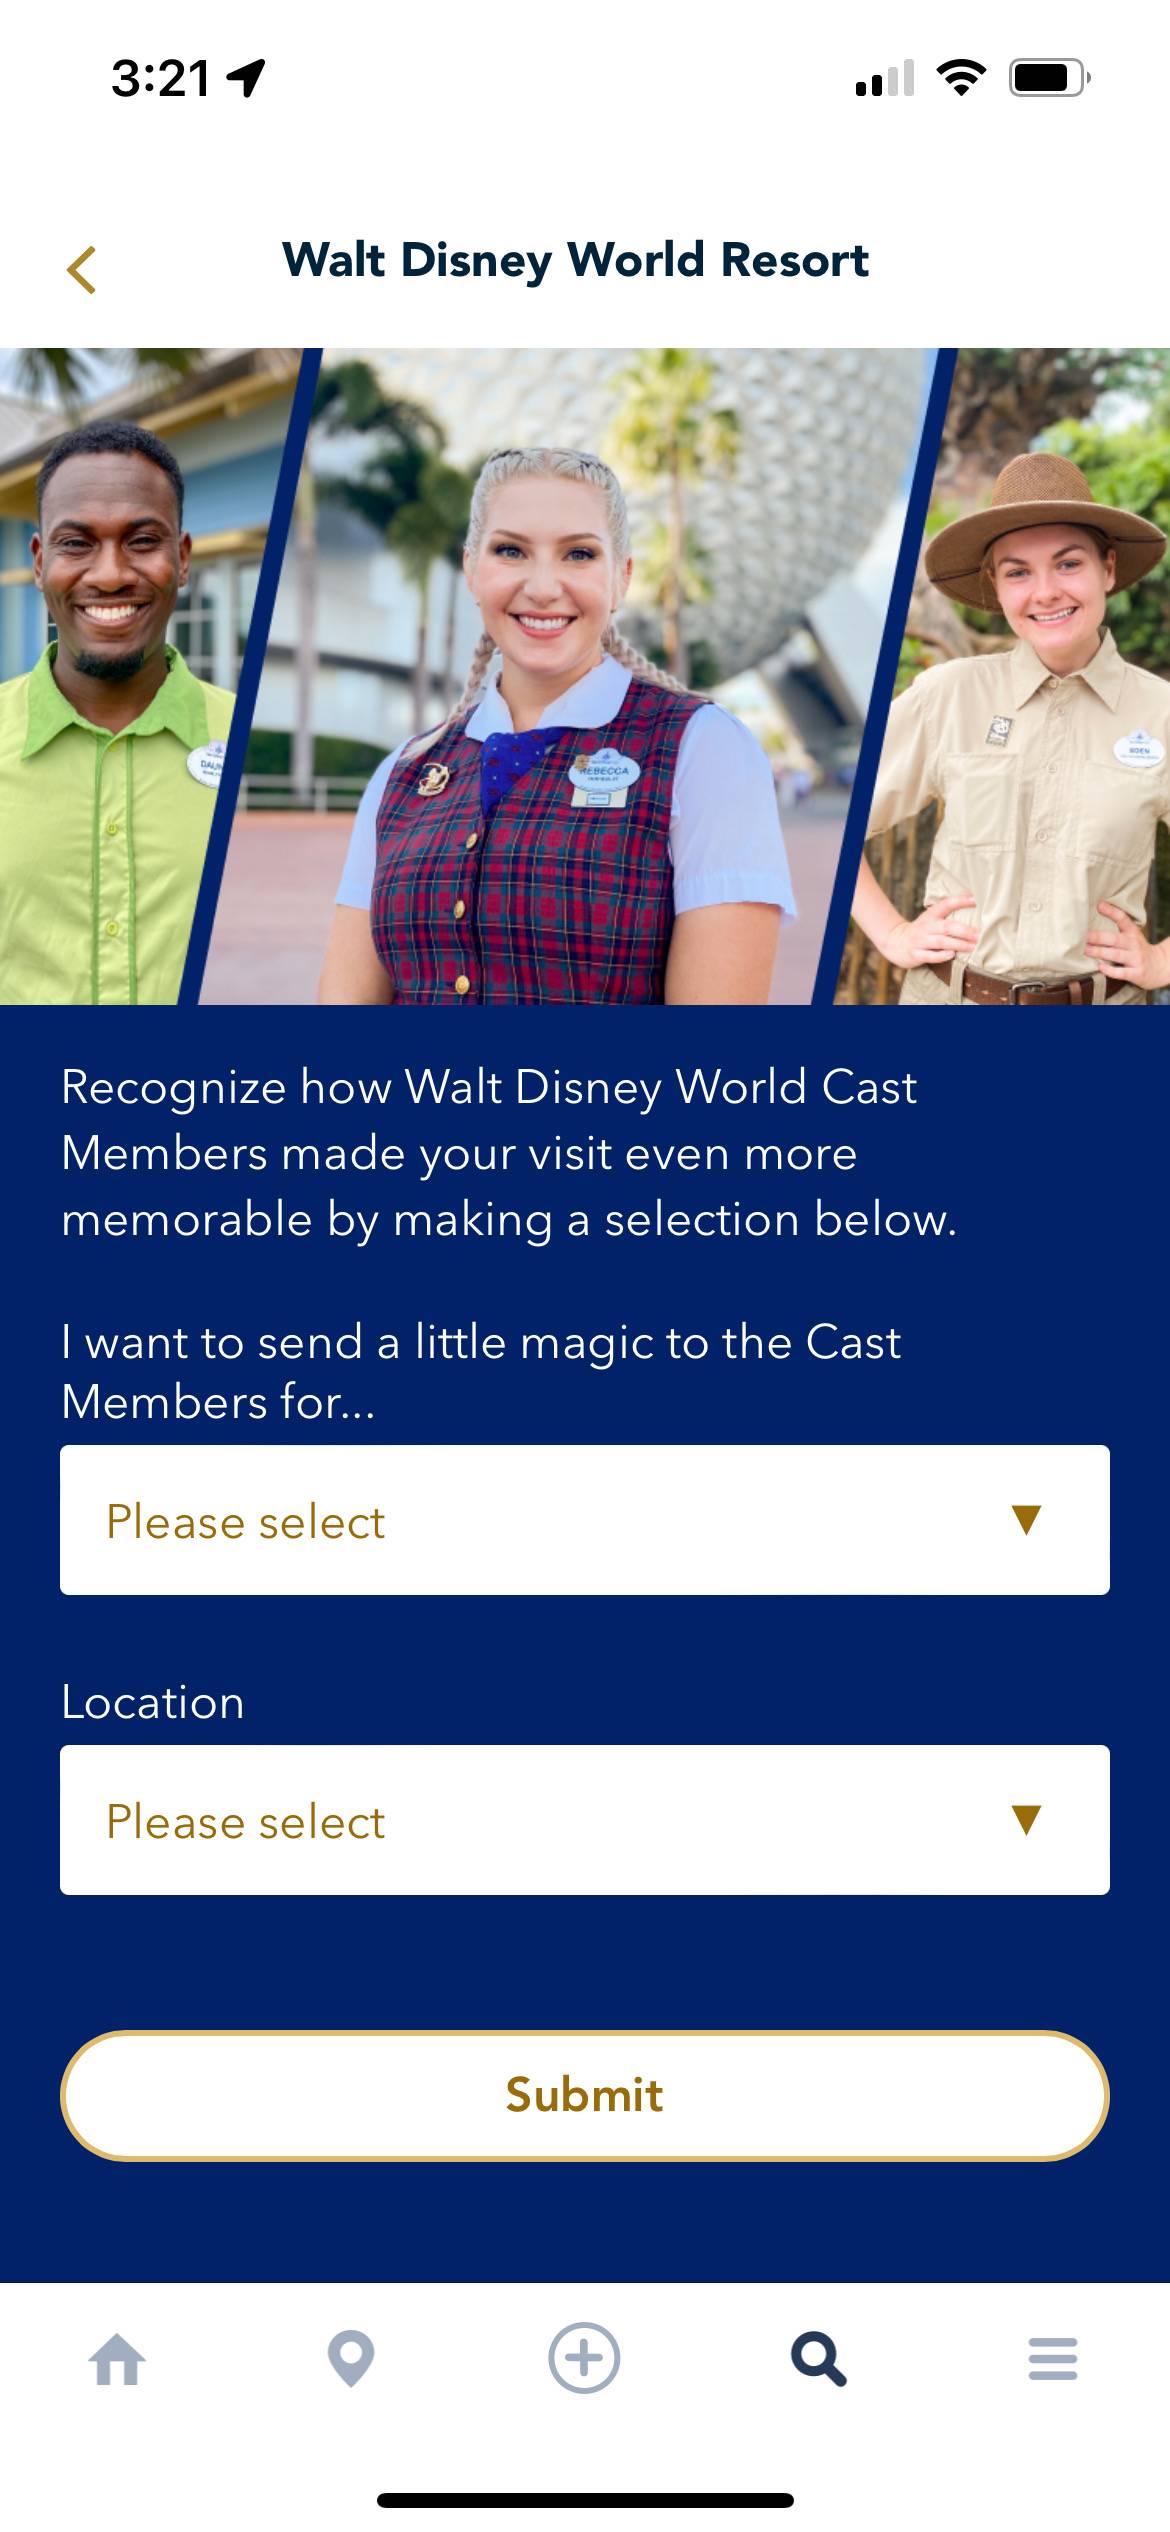 Walt Disney World Cast compliment feature comes to My Disney Experience